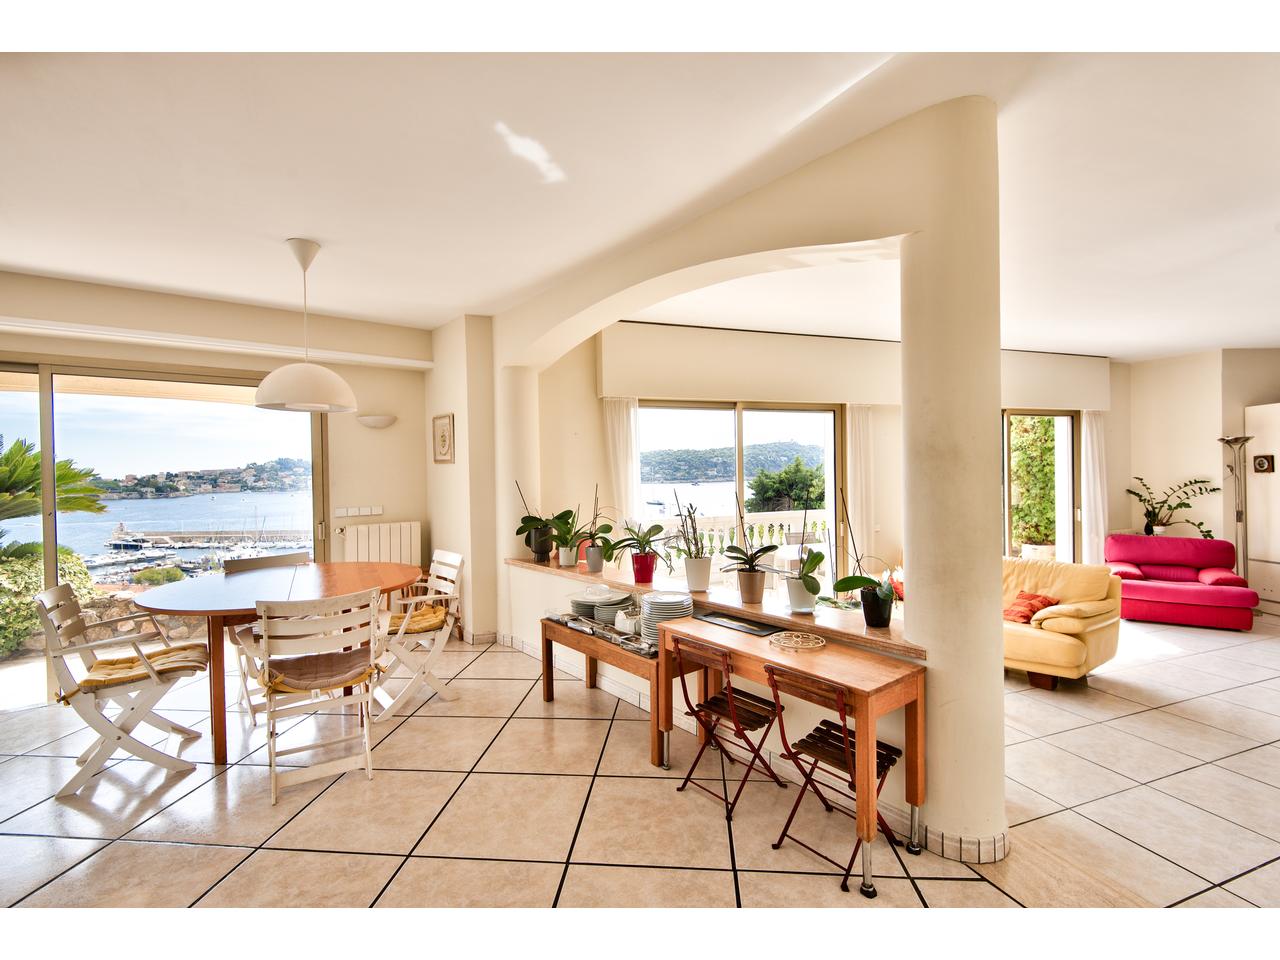 Nice Riviera - Agence Immobiliére Nice Côte d'Azur|House 7 Rooms 331m2  for sale  3 850 000 €